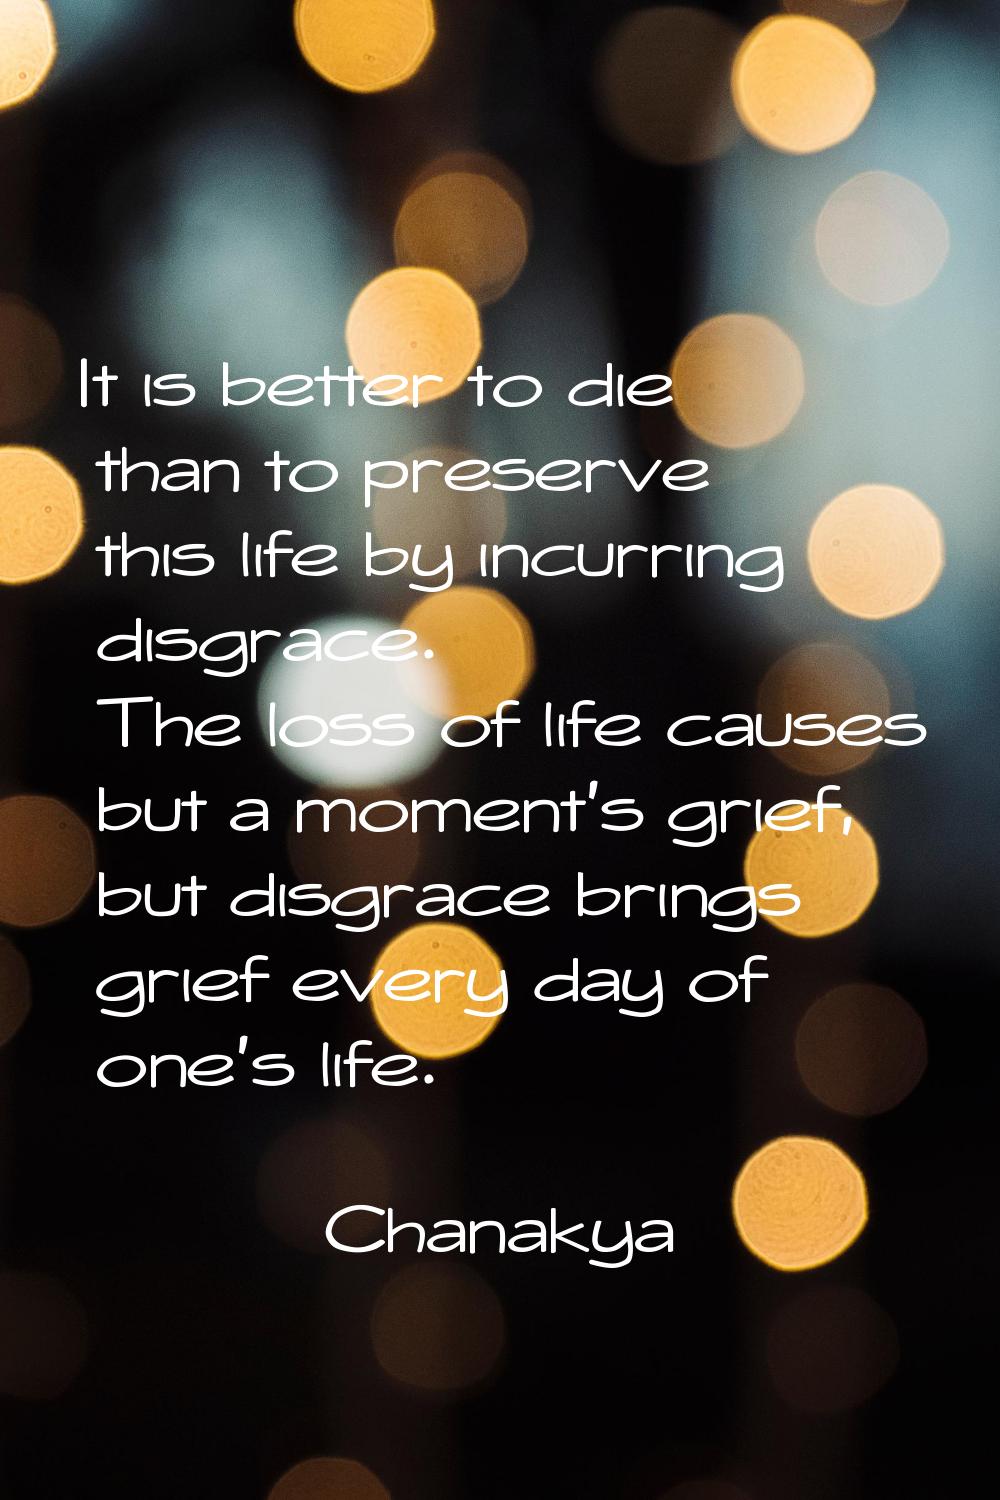 It is better to die than to preserve this life by incurring disgrace. The loss of life causes but a